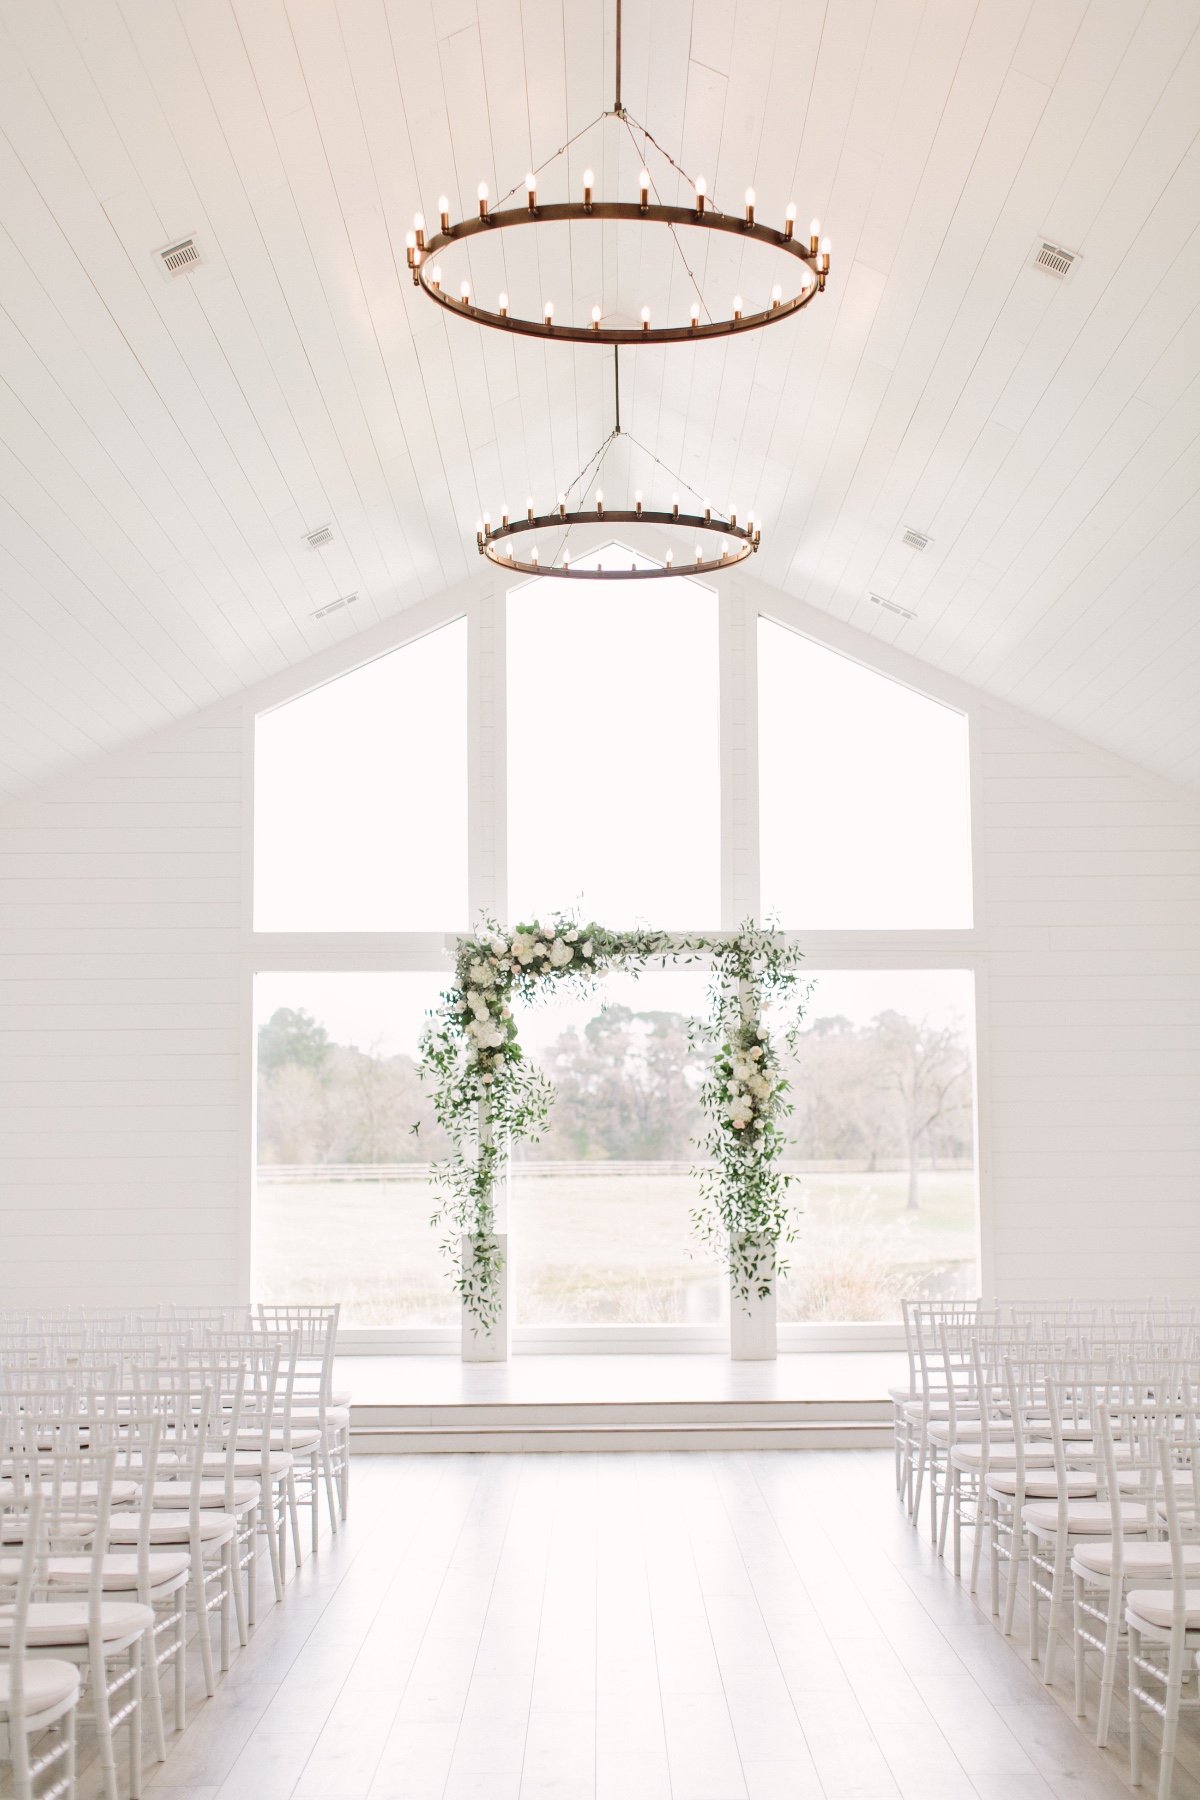 white and green florals for ceremony backdrop